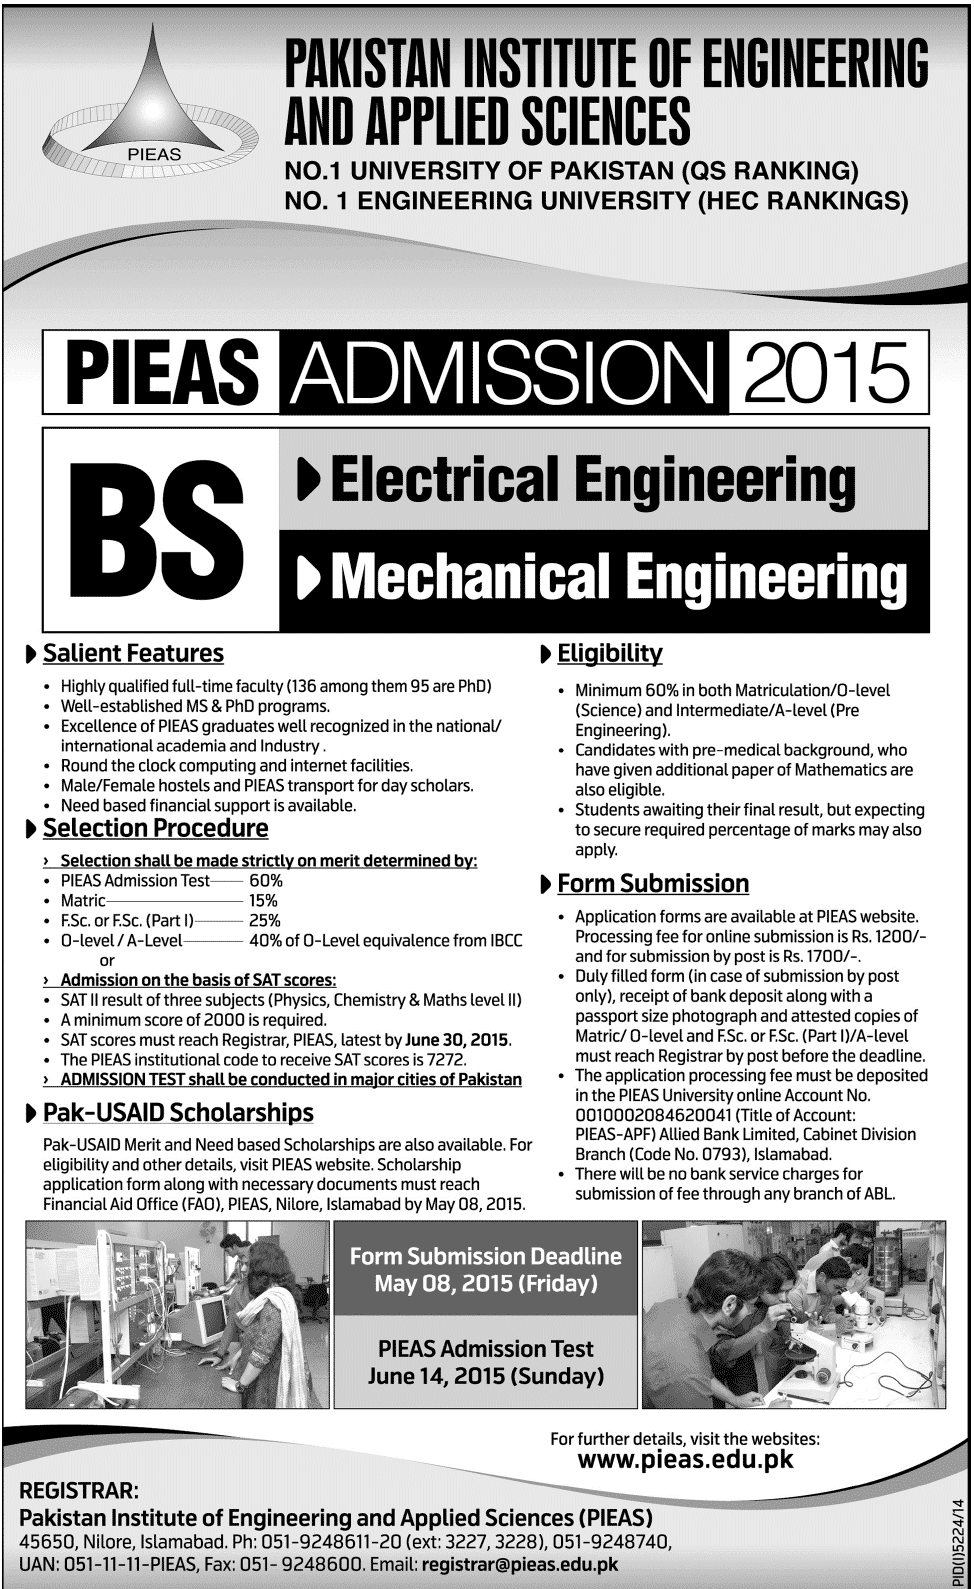 PIEAS announces admissions for BS Electrical and Mechanical Engineering for session 2015